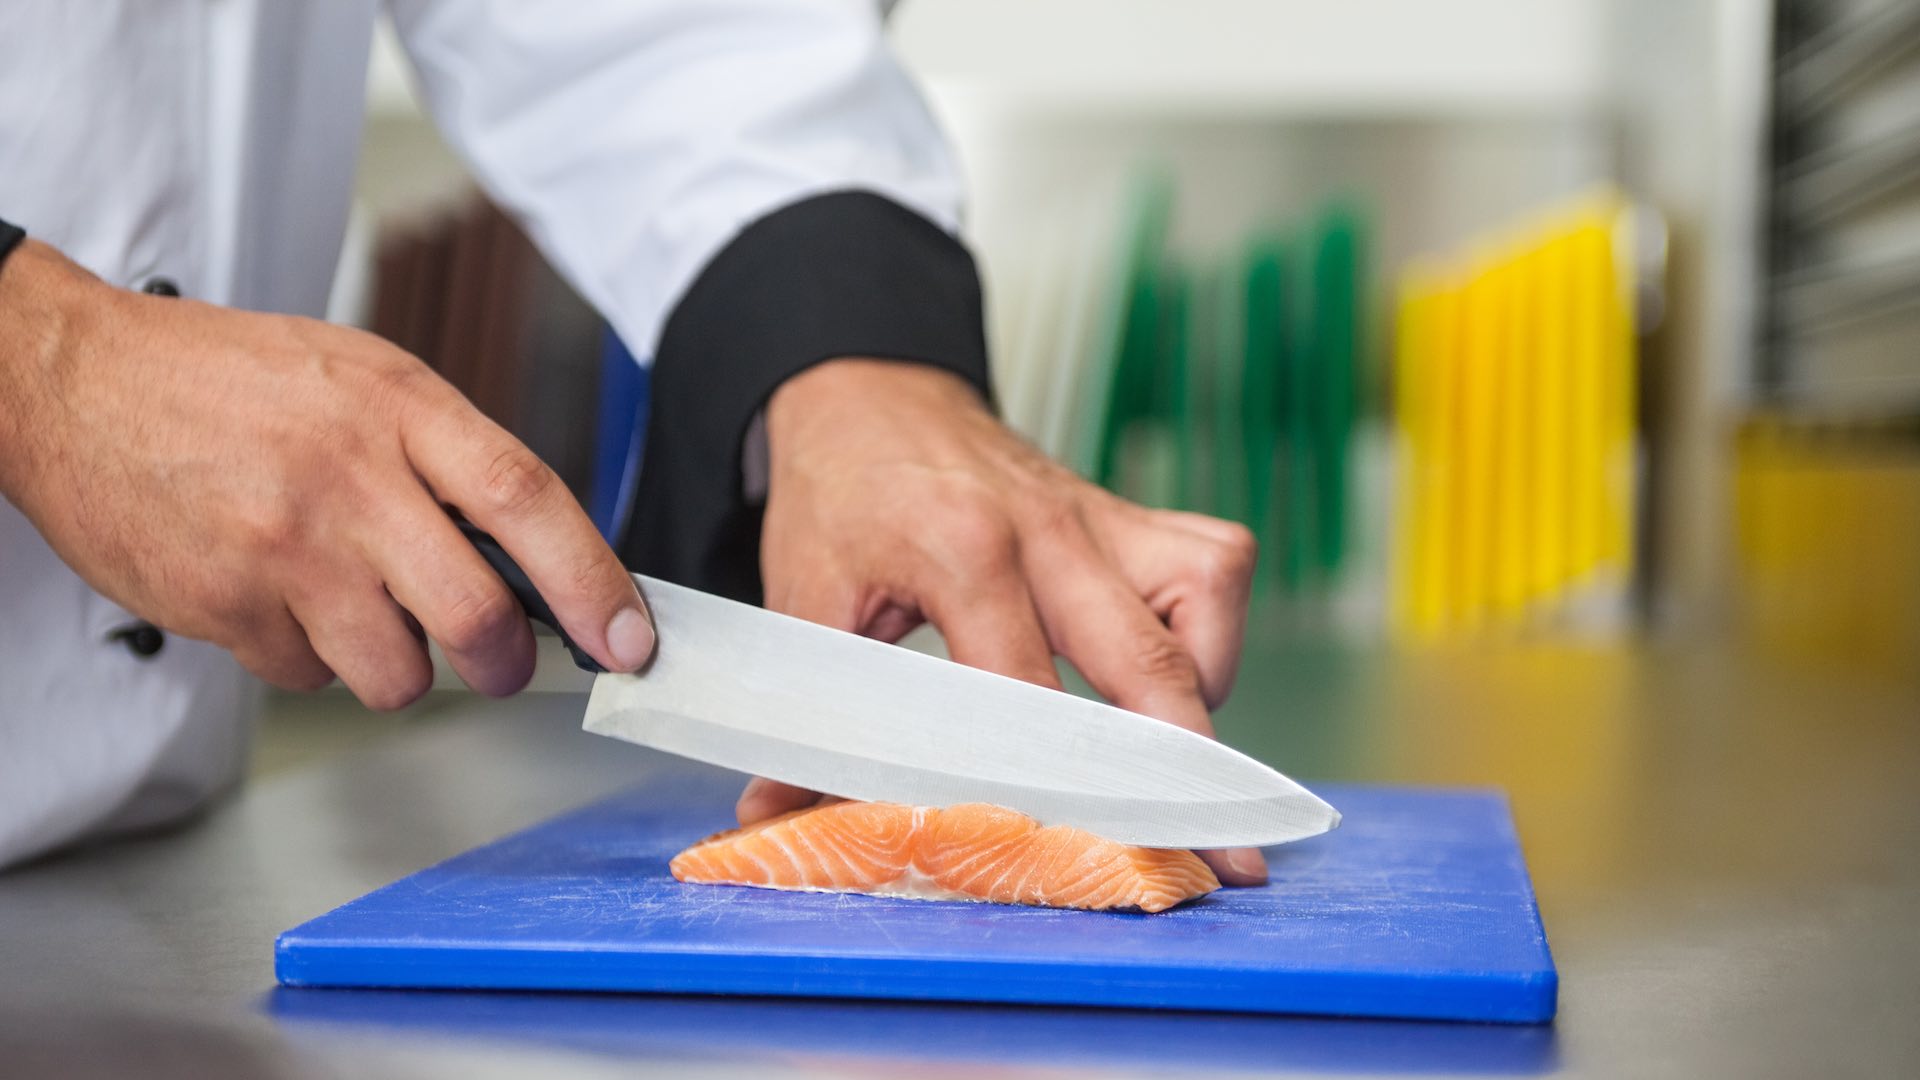 Toxicologist discusses the safety of plastic cutting boards amid new findings